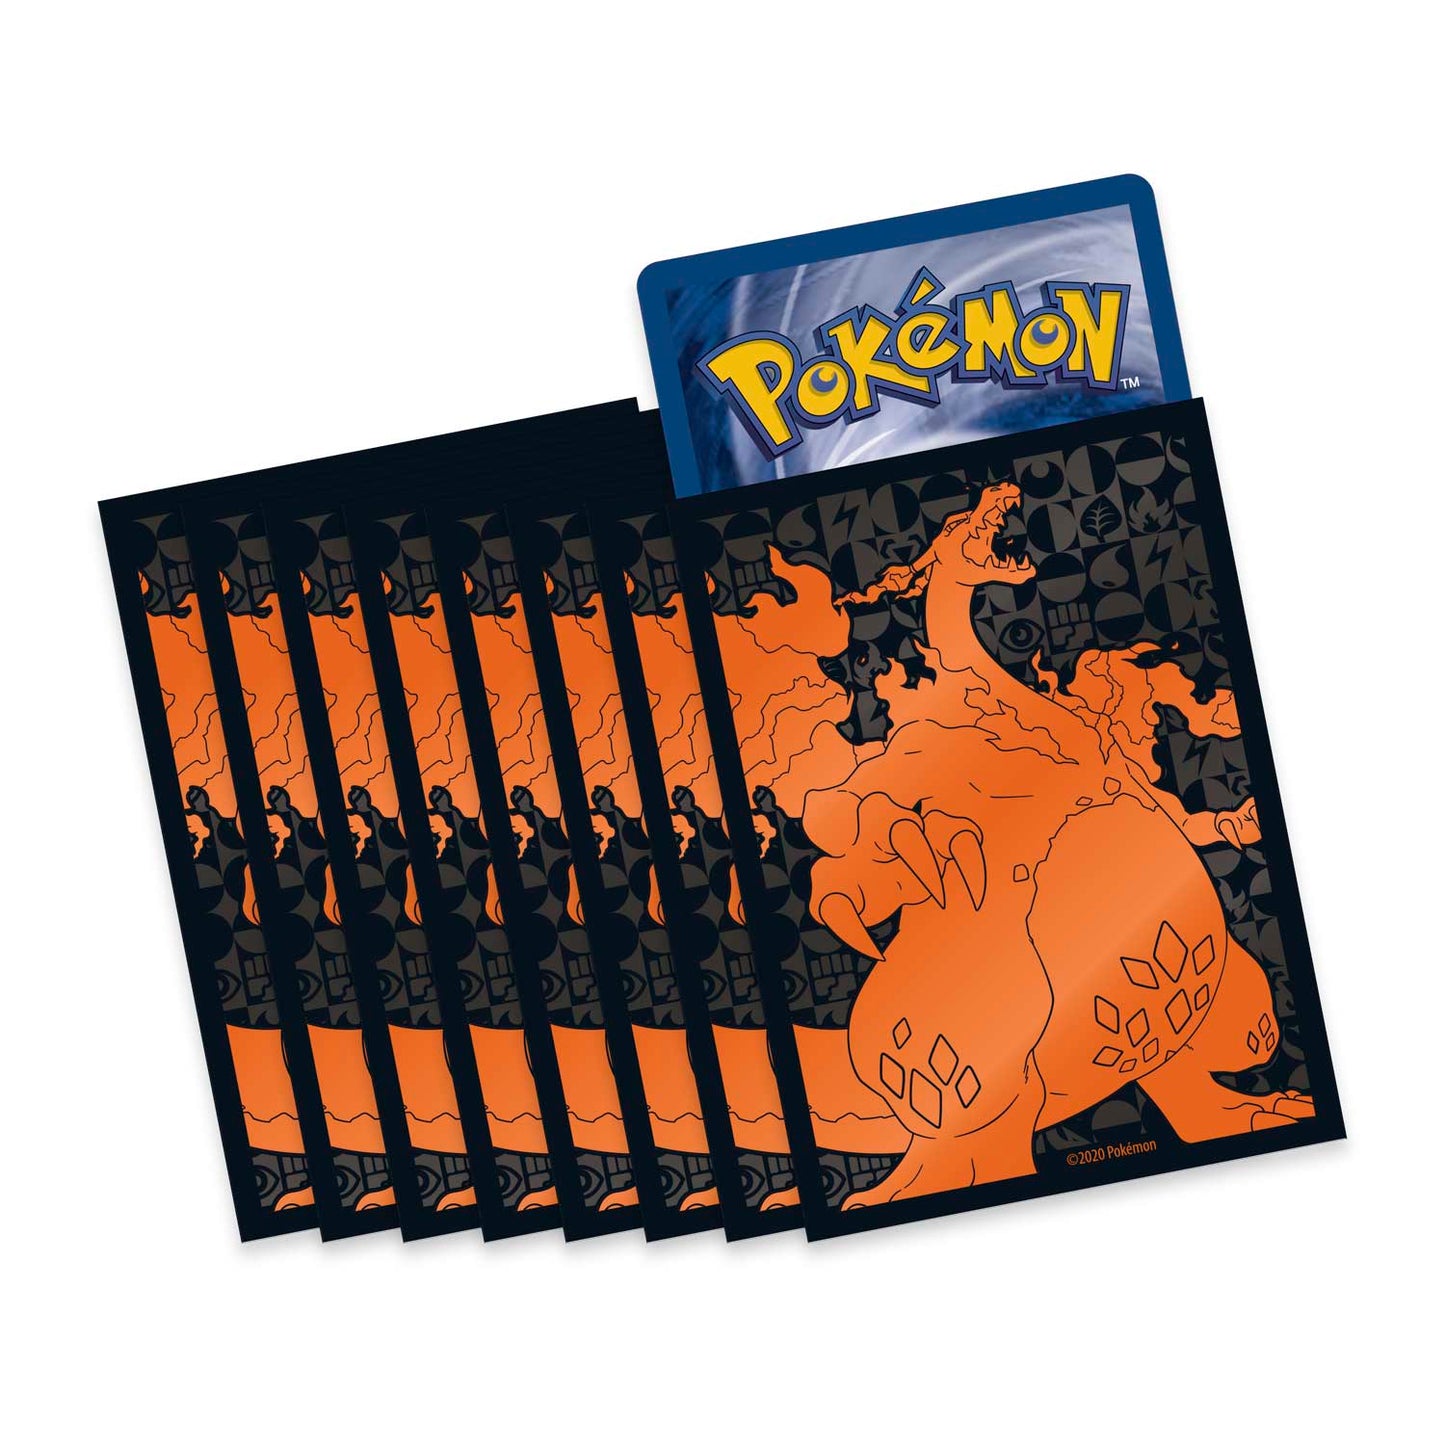 Pokémon Trading Card Game Official Card Sleeves x65 - Gigantamax Charizard